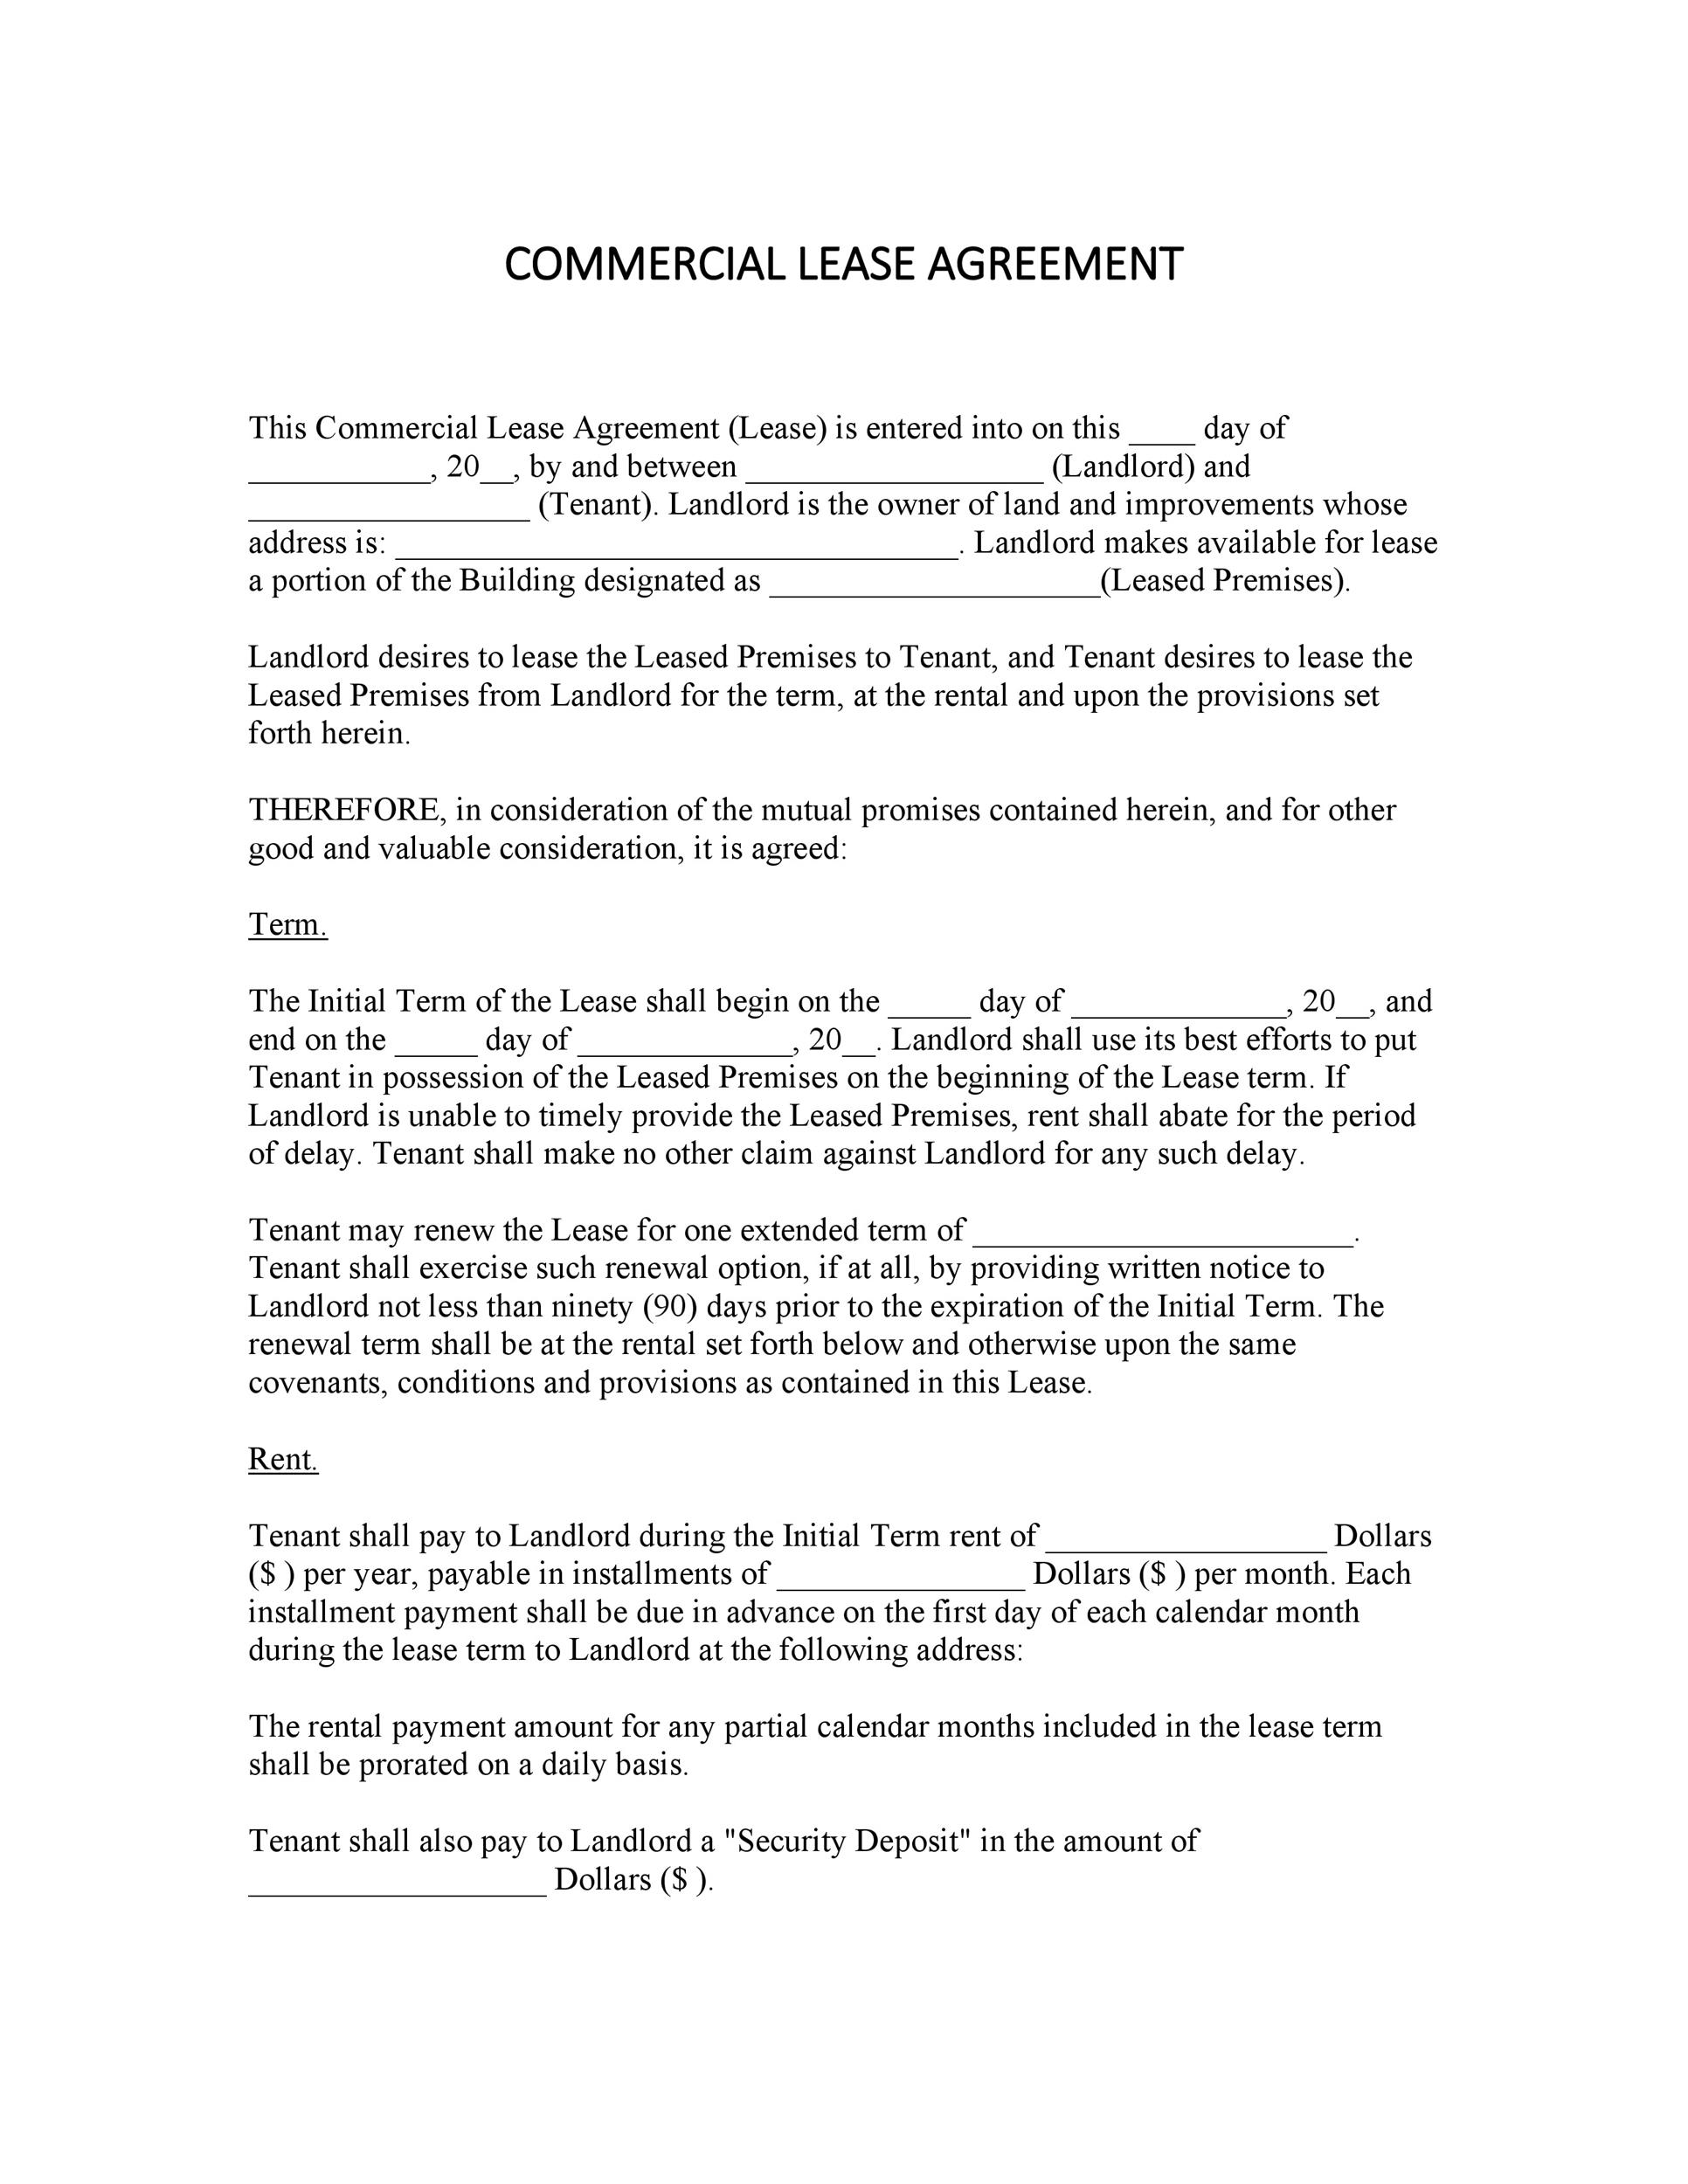 26 Free Commercial Lease Agreement Templates ᐅ TemplateLab